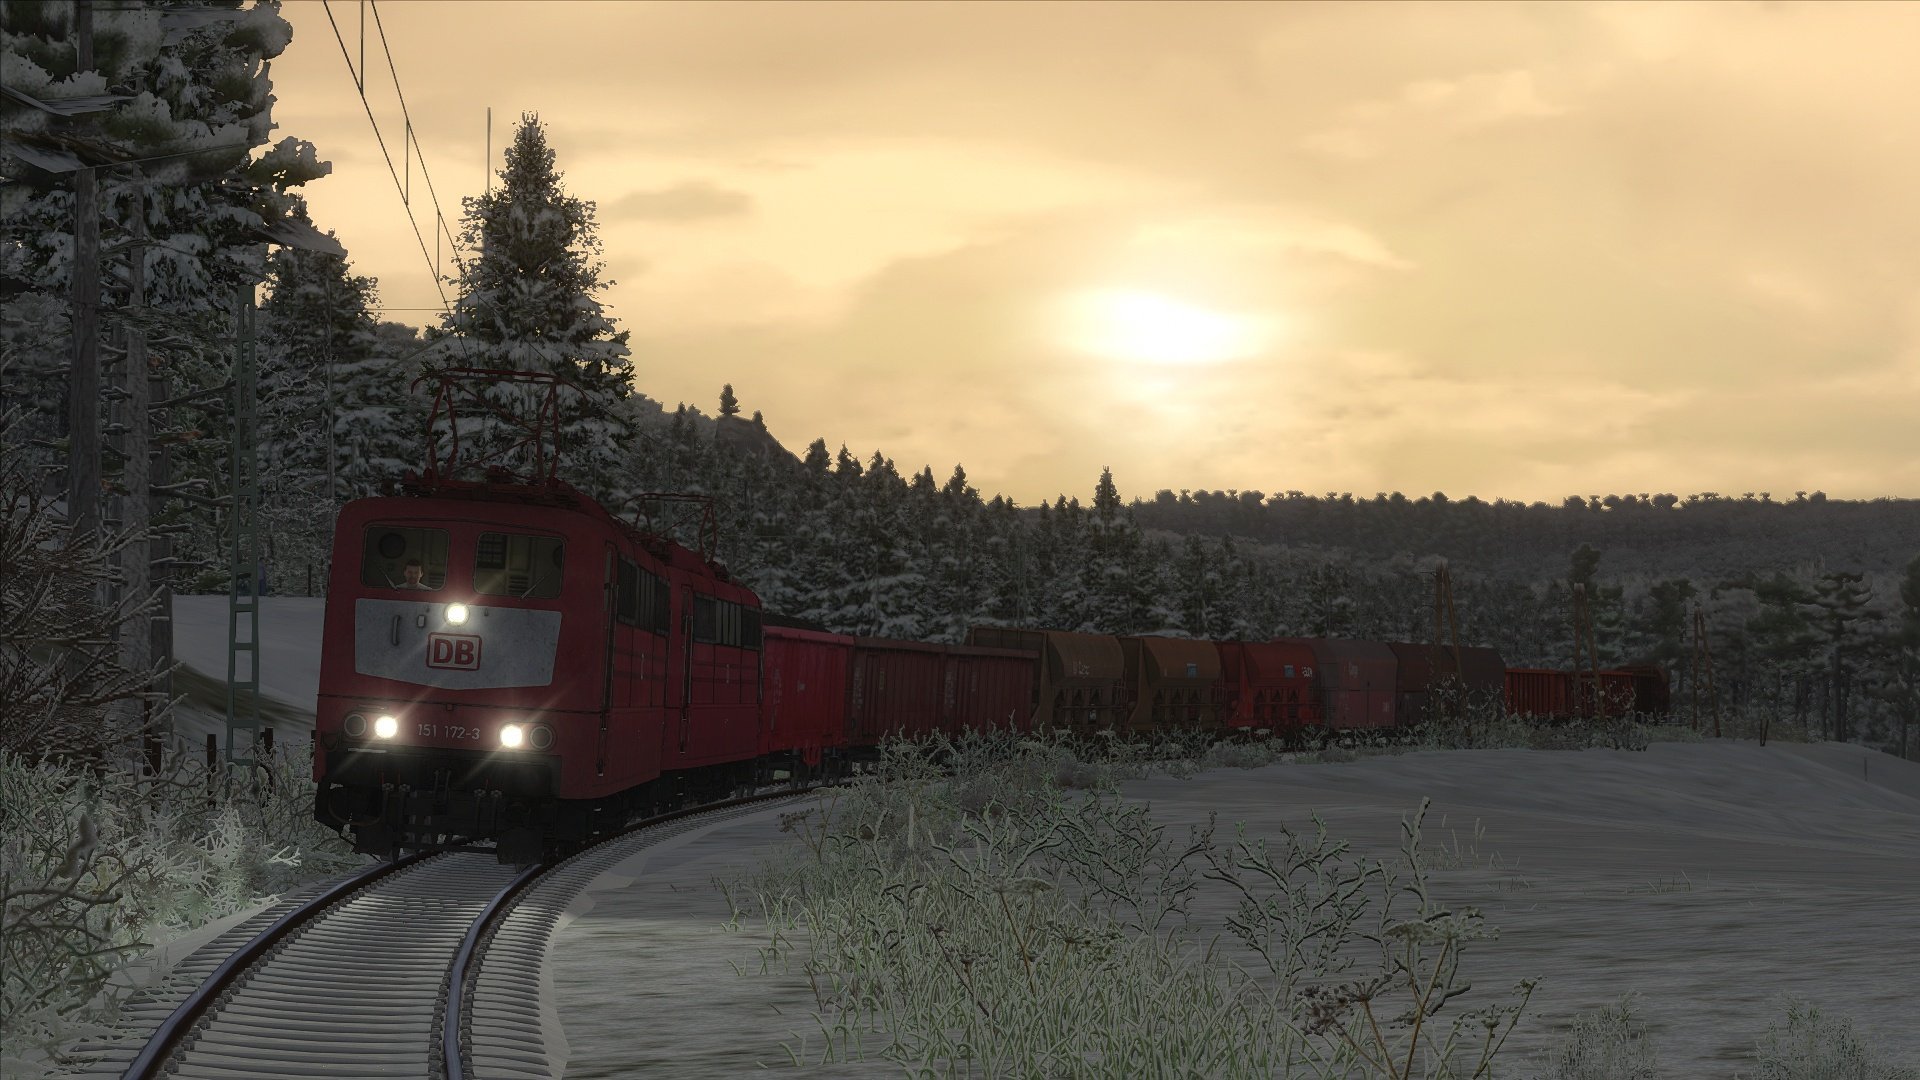 151 172 with a coal train